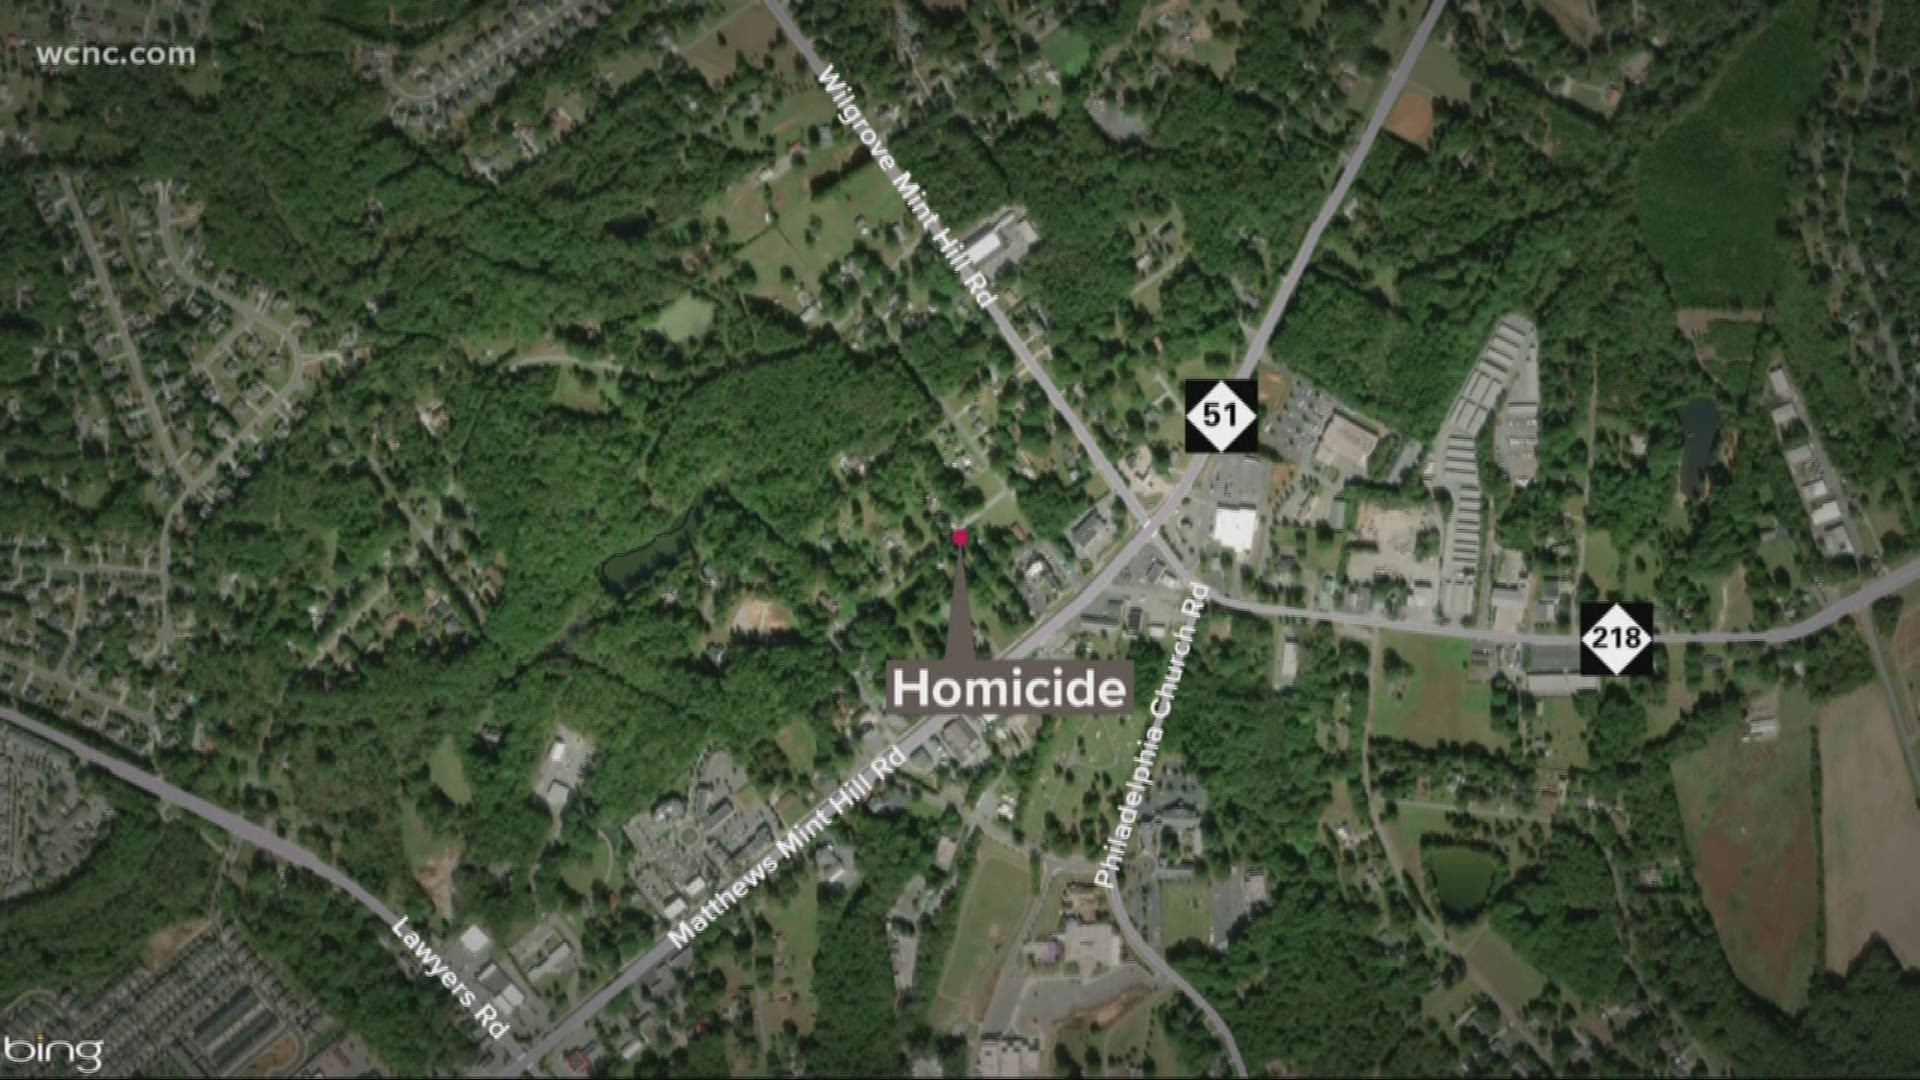 Officers say they found a man's body around 6 a.m. Sunday on Pinewood Circle in Mint Hill.